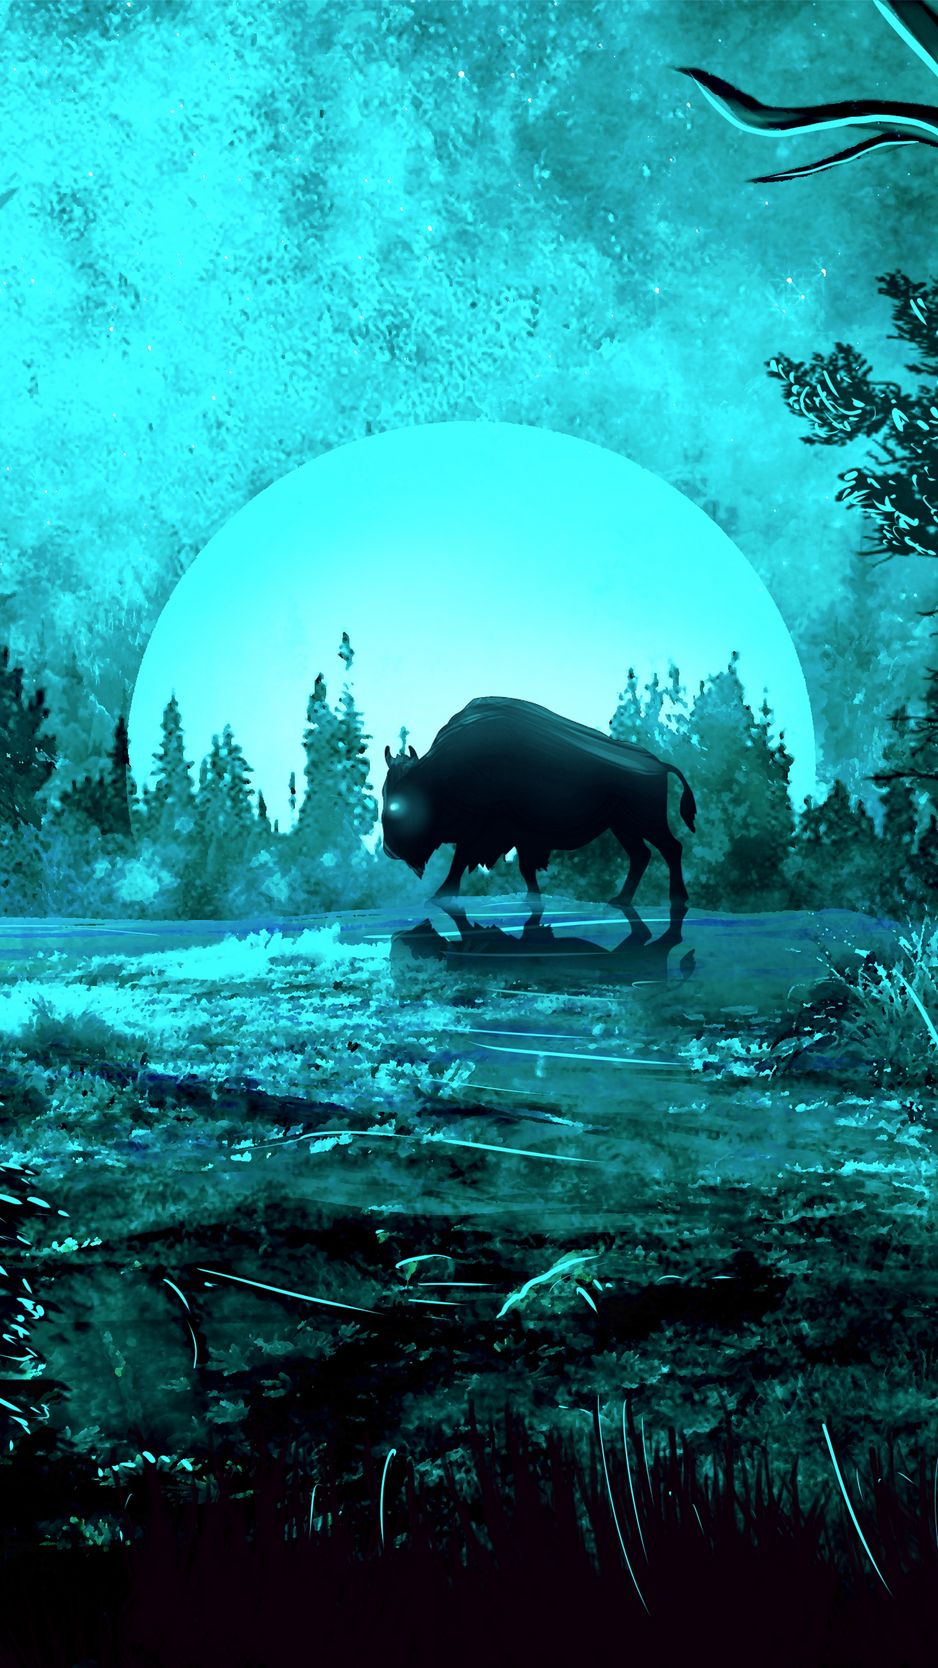 Download wallpaper 938x1668 bison, moon, night, light, art iphone 8/7/6s/6  for parallax hd background